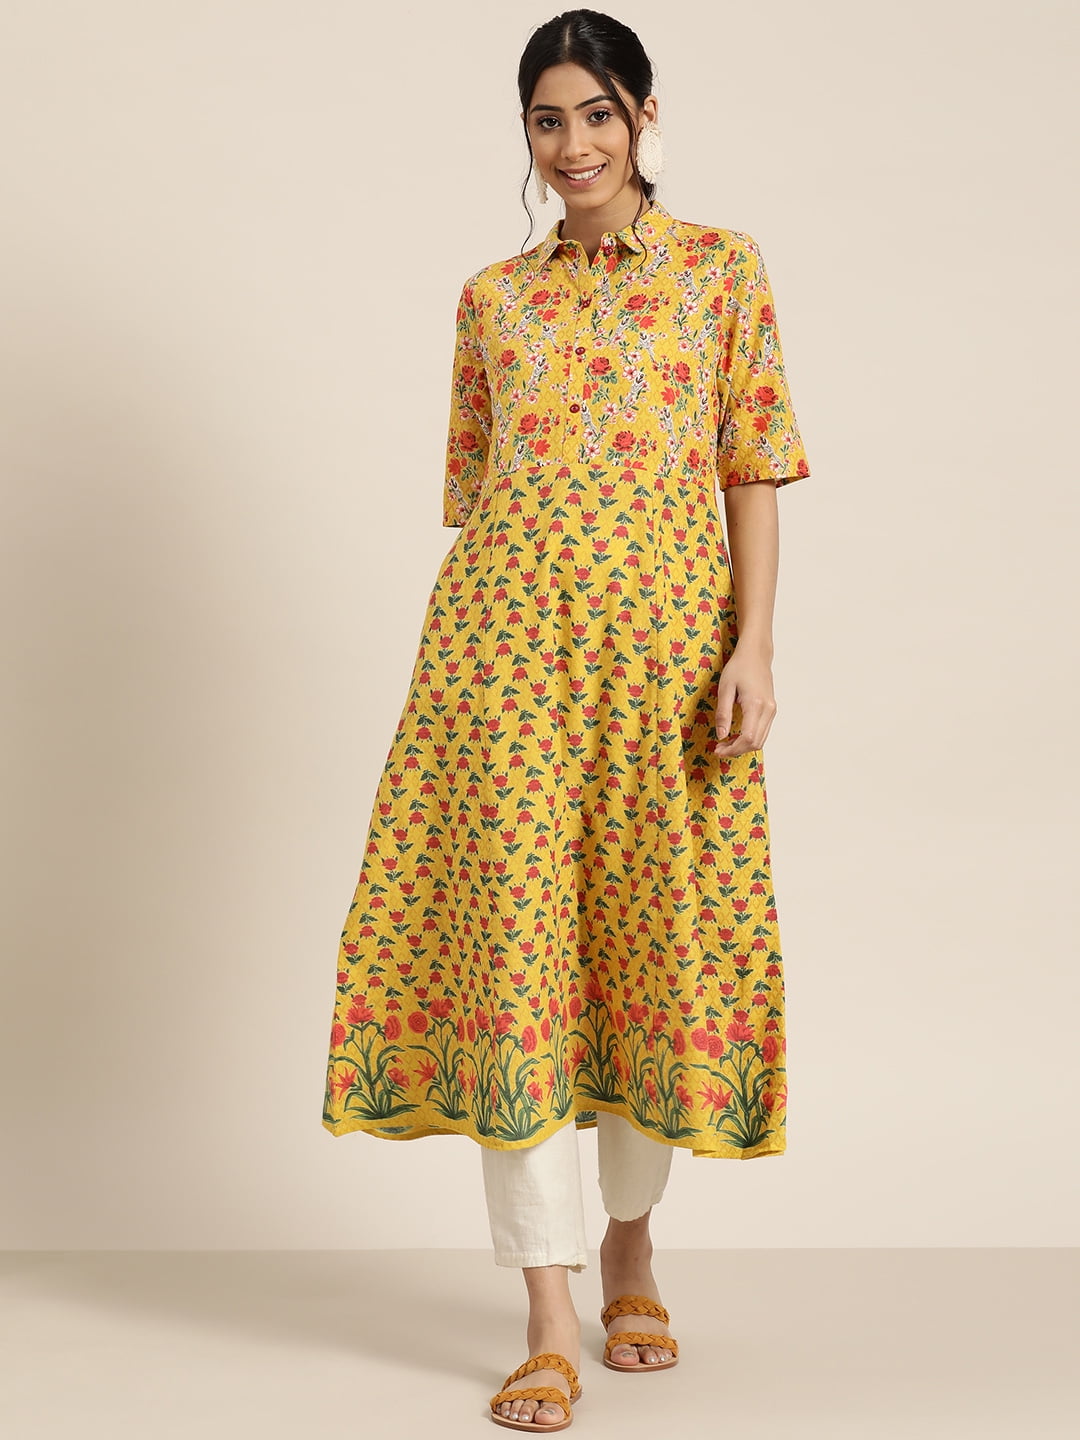 Cotton Round Neck Printed 3/4th Sleeve Yellow Color Designer Kurti For  Ladies Decoration Material: Paint at Best Price in New Delhi | Alam  Enterprises